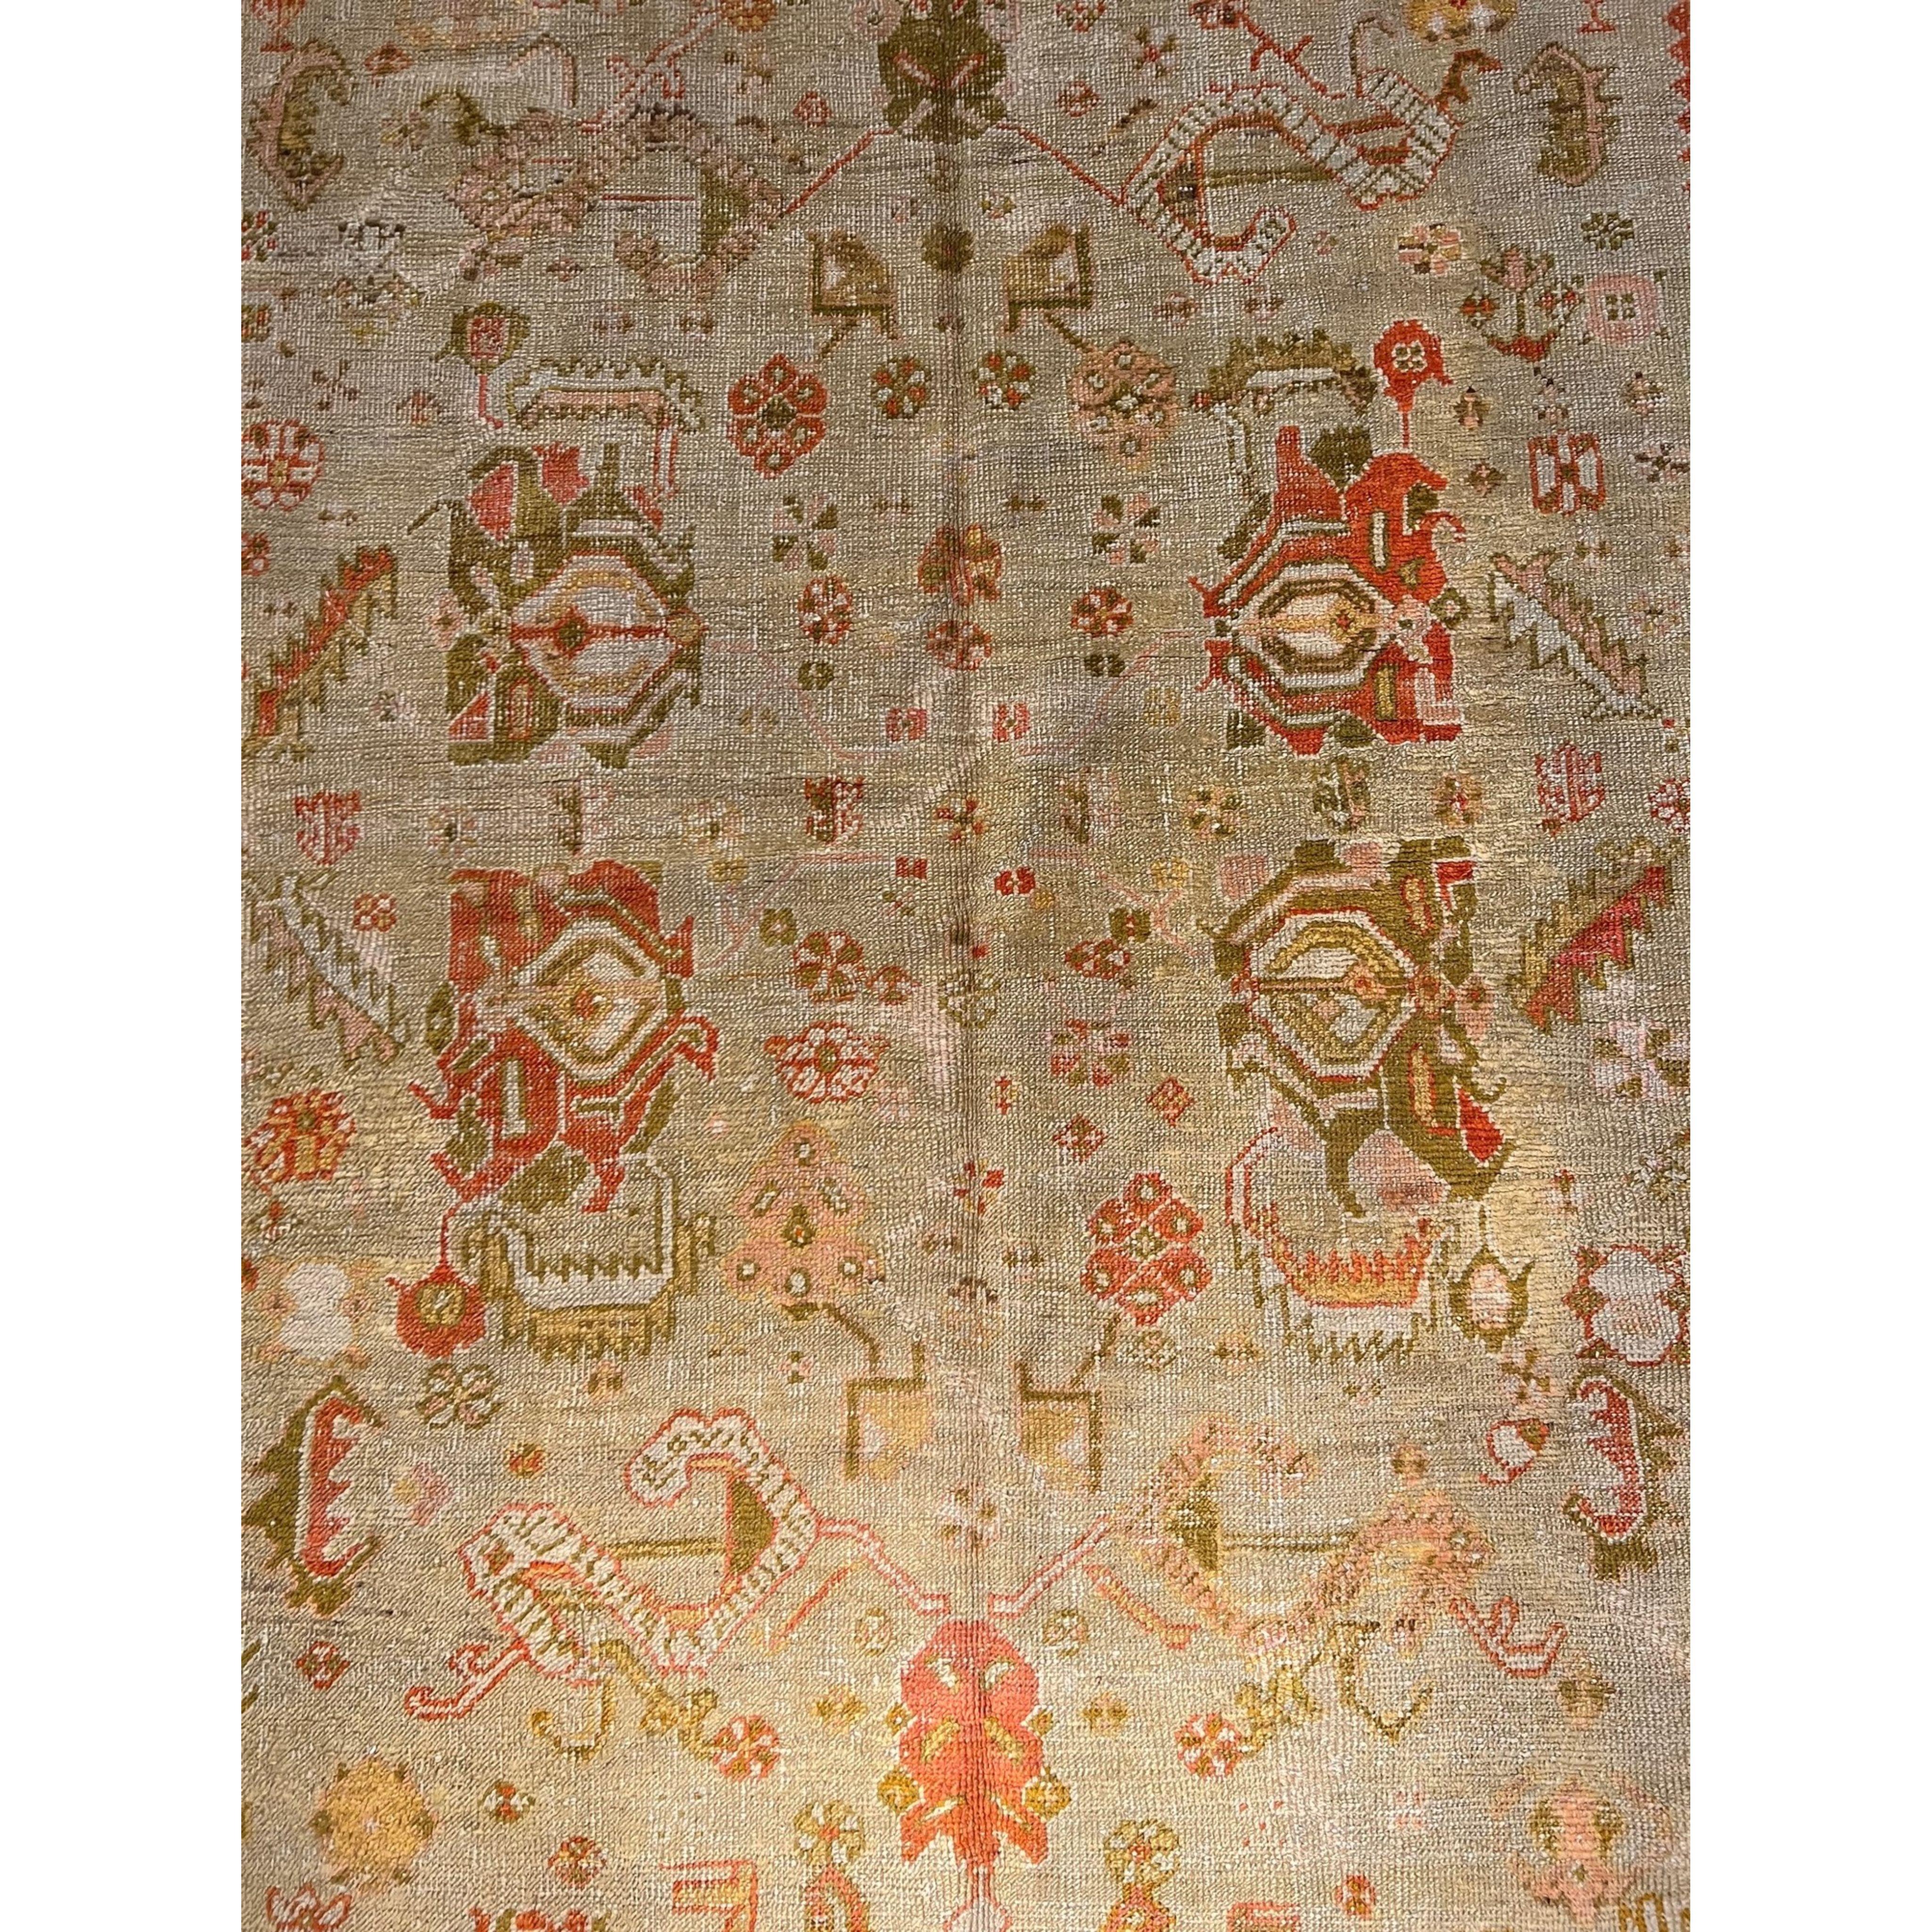 Antique Oushak Rug 11 X 8 In Good Condition For Sale In Los Angeles, US